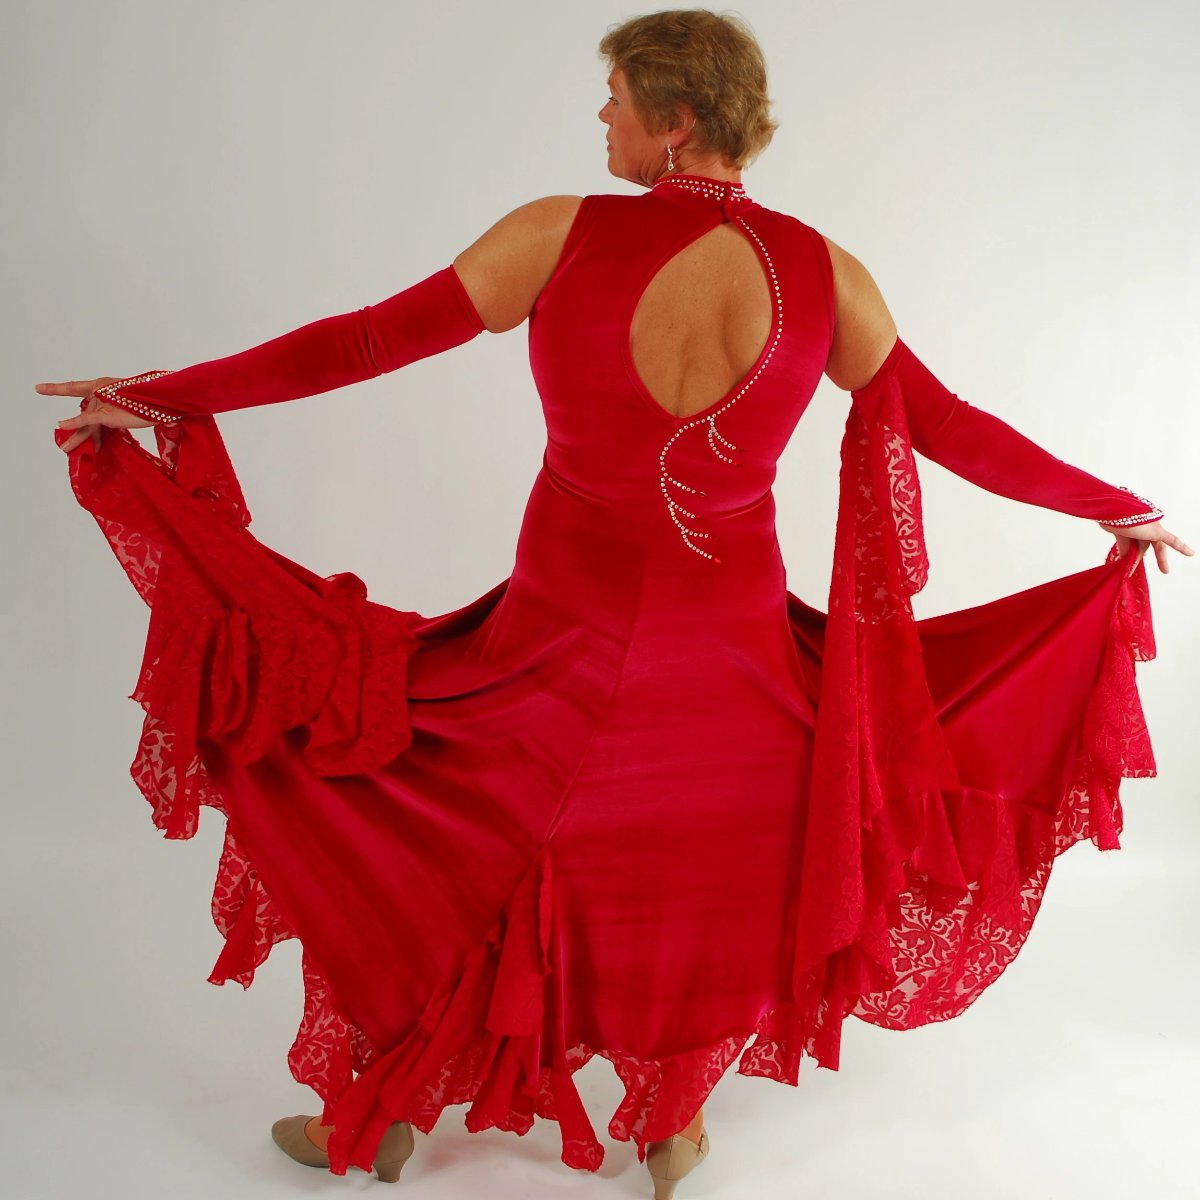 back view of Red ballroom dress was created in luxurious red stretch velvet with clip-n-cut chiffon insets & flounces & inset down bodice with matching gauntlets...embellished with CAB Swarovski rhinestones & has keyhole back. 